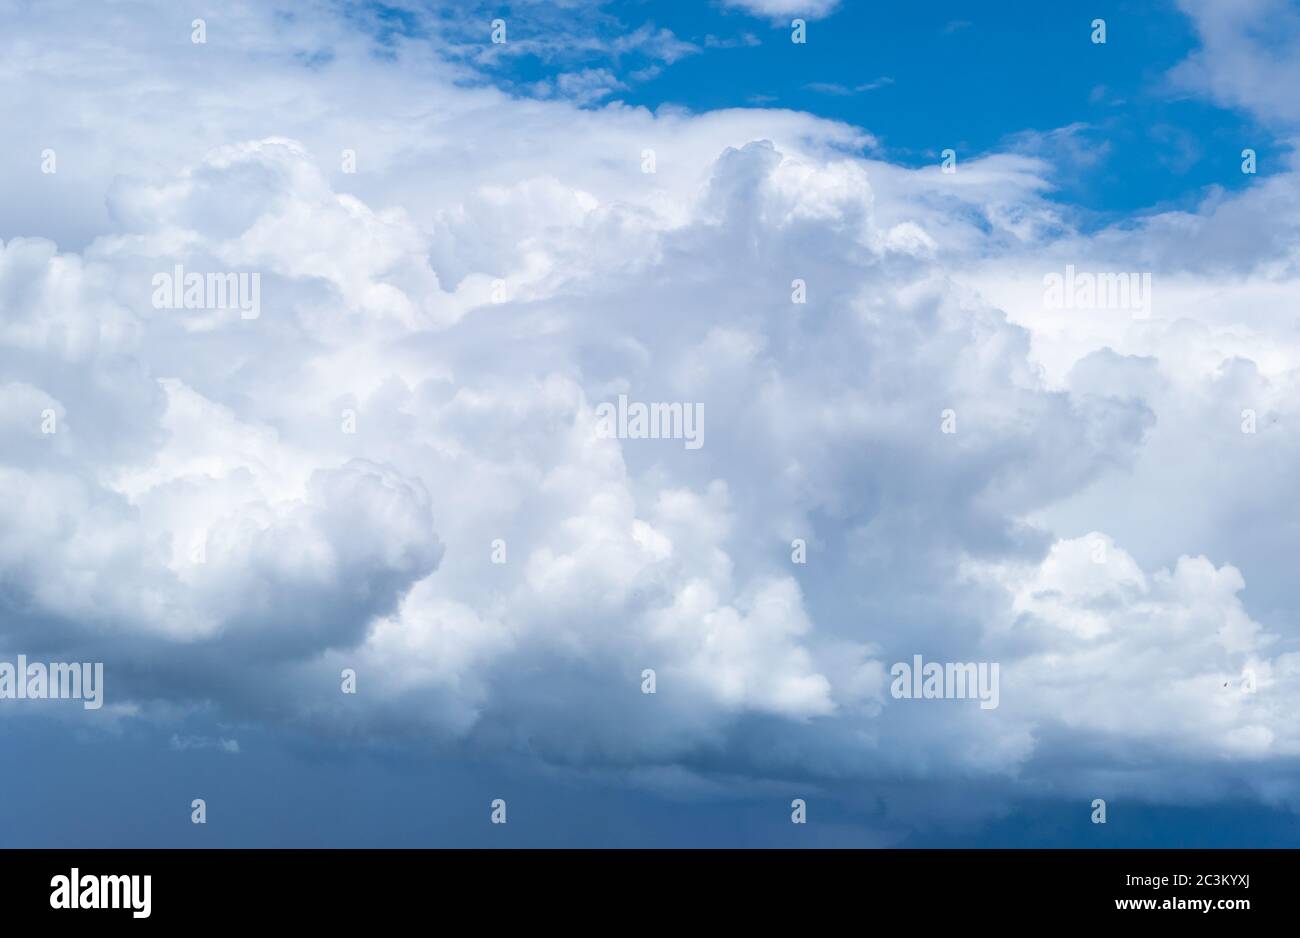 Cloudy sky, clouds in the blue sky, Bavaria, Germany, Europe Stock Photo